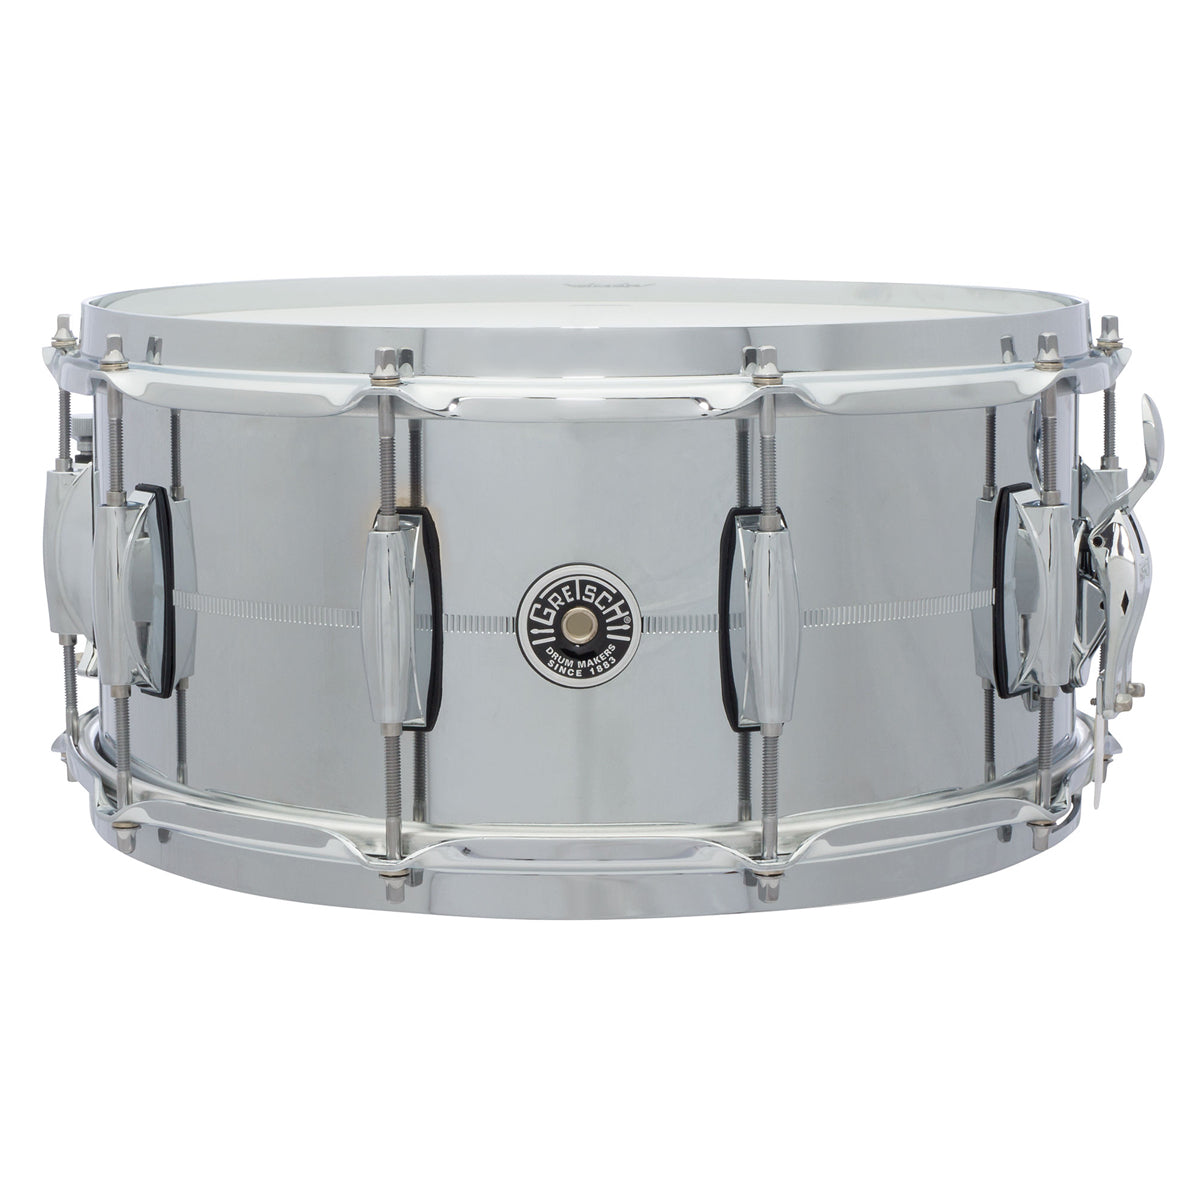 Gretsch USA Brooklyn Chrome Over Steel 14"x6.5" Snare Drum